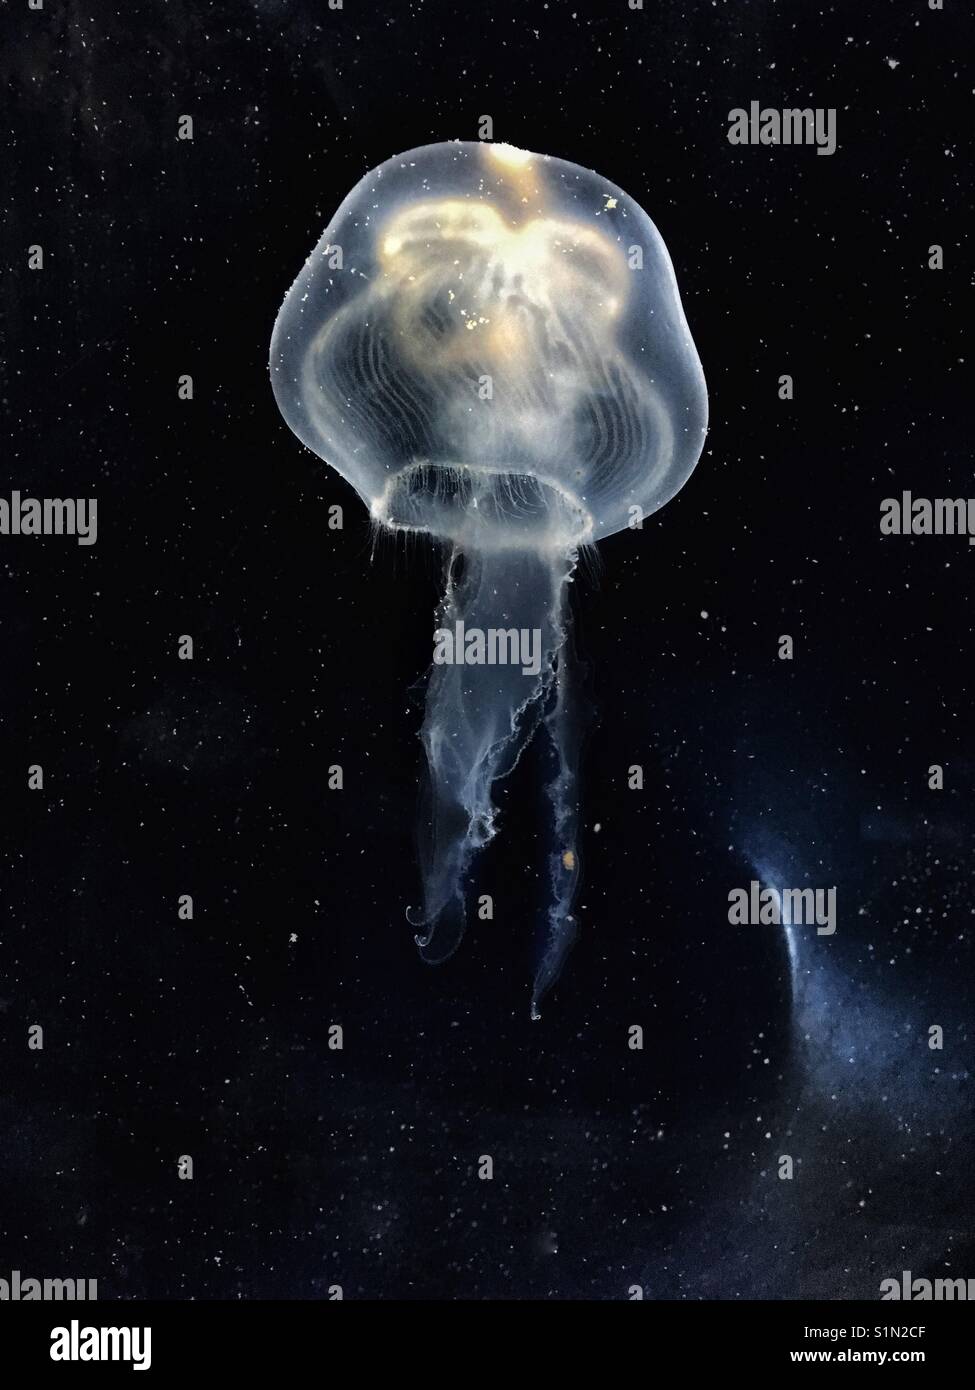 Moon jelly fish against space like background Stock Photo